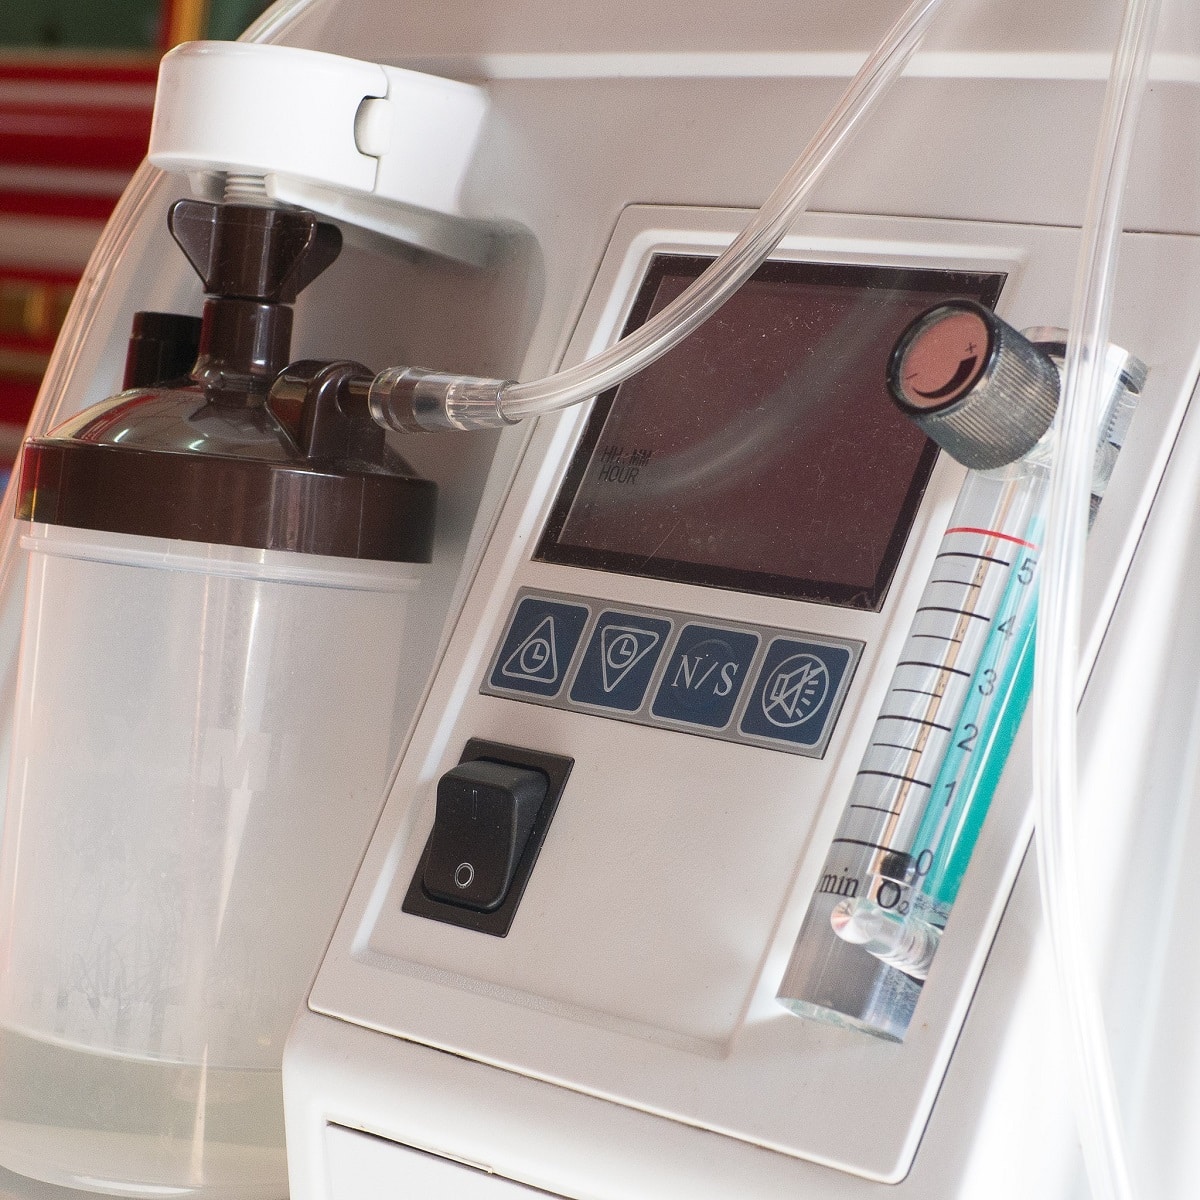 Running an Oxygen Concentrator with a UPS Battery Backup System